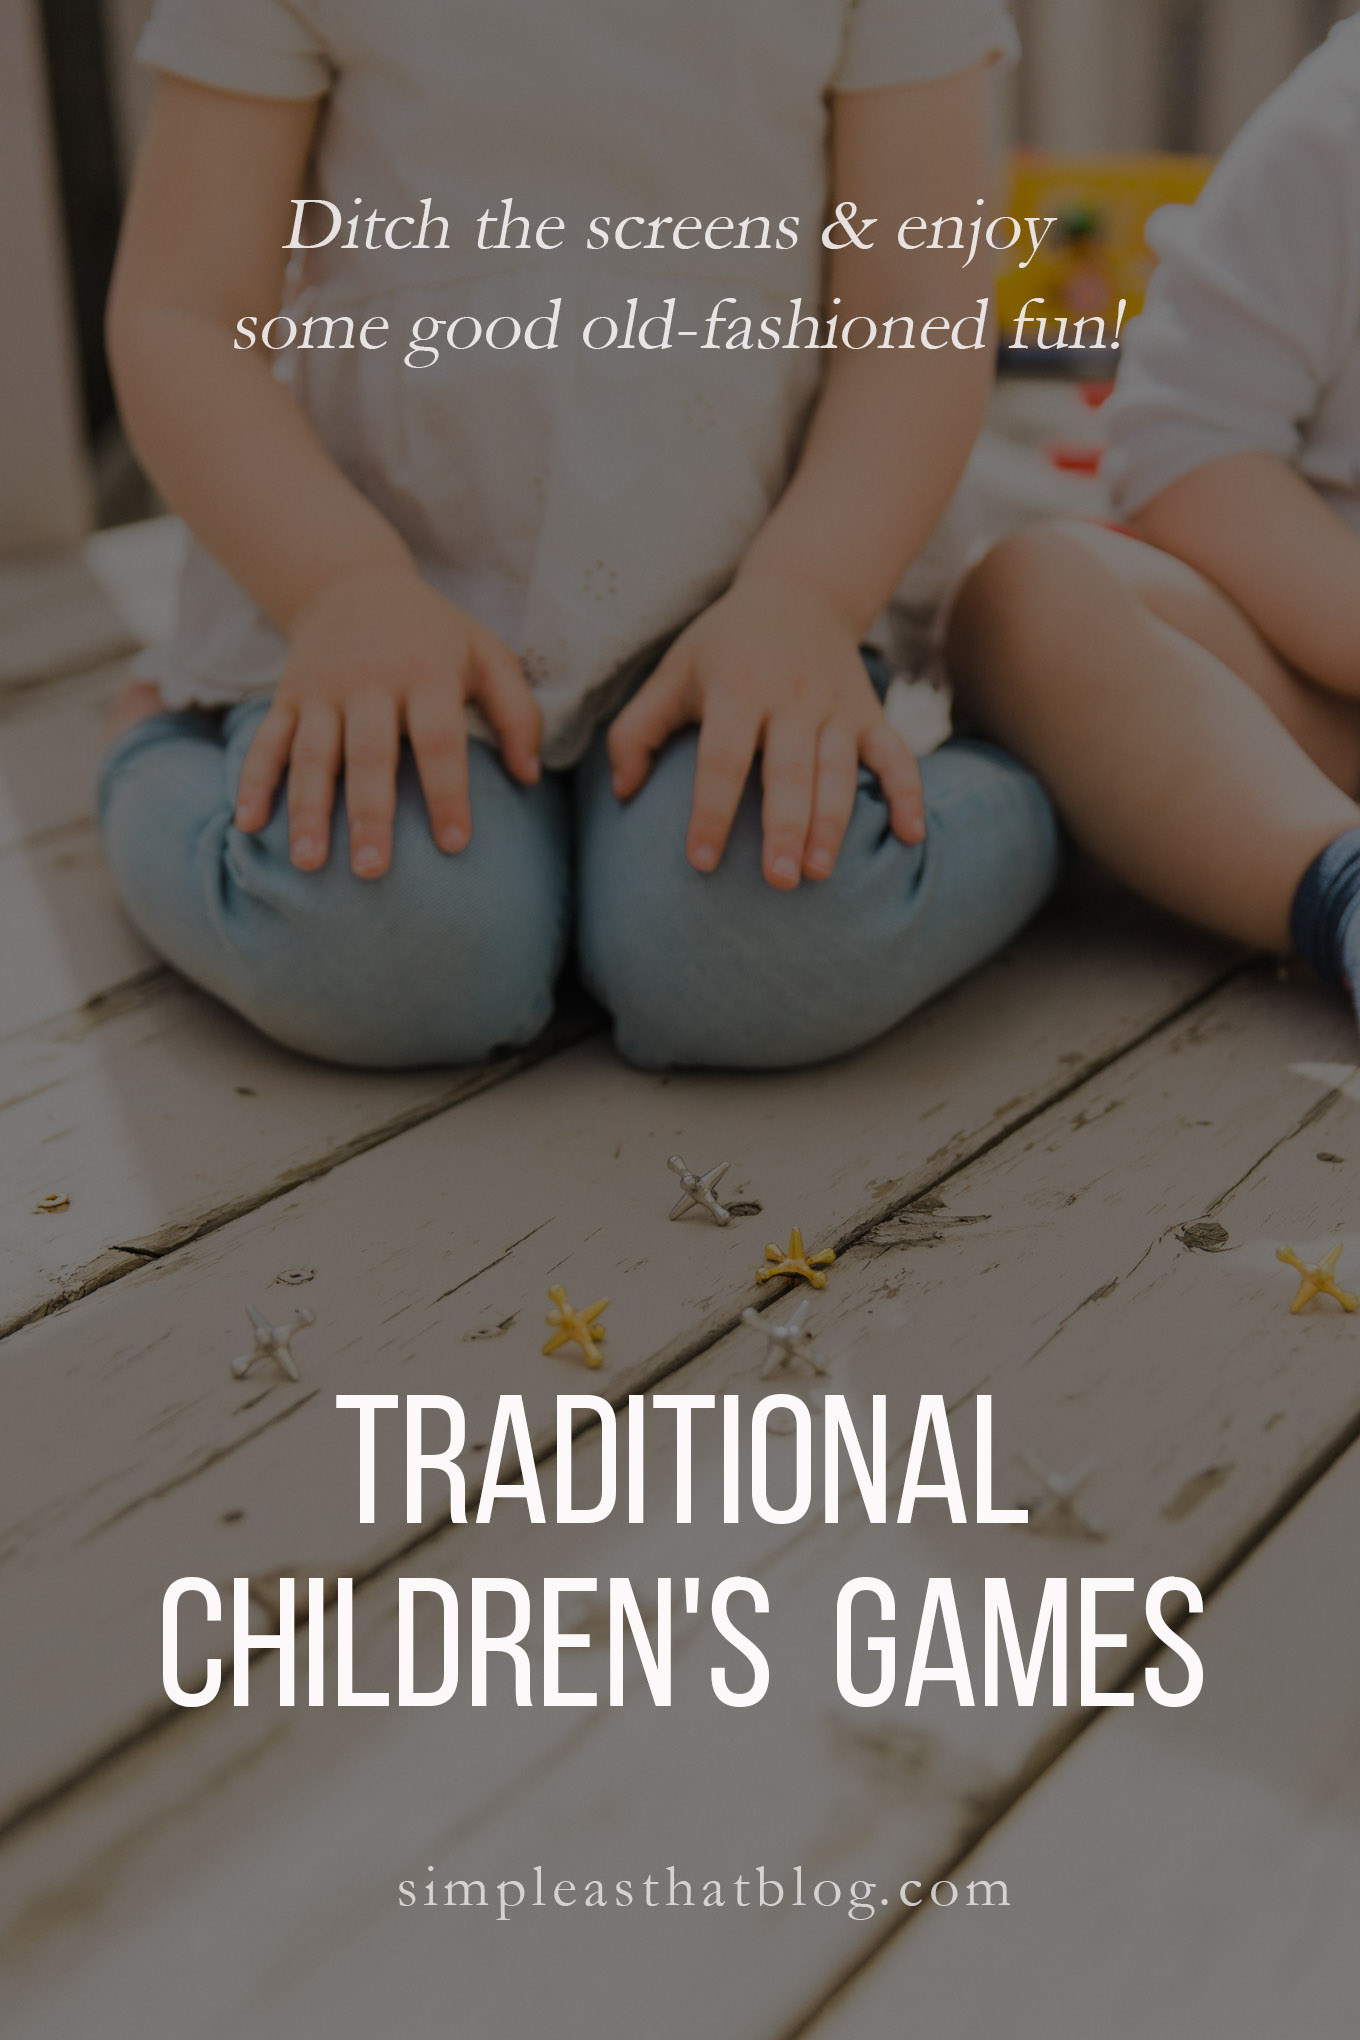 The benefits of simple play when it comes to a child’s development are innumerable. This list of traditional children’s games is a great place to start when it comes to ditching the screens and enjoying some good old-fashioned fun!